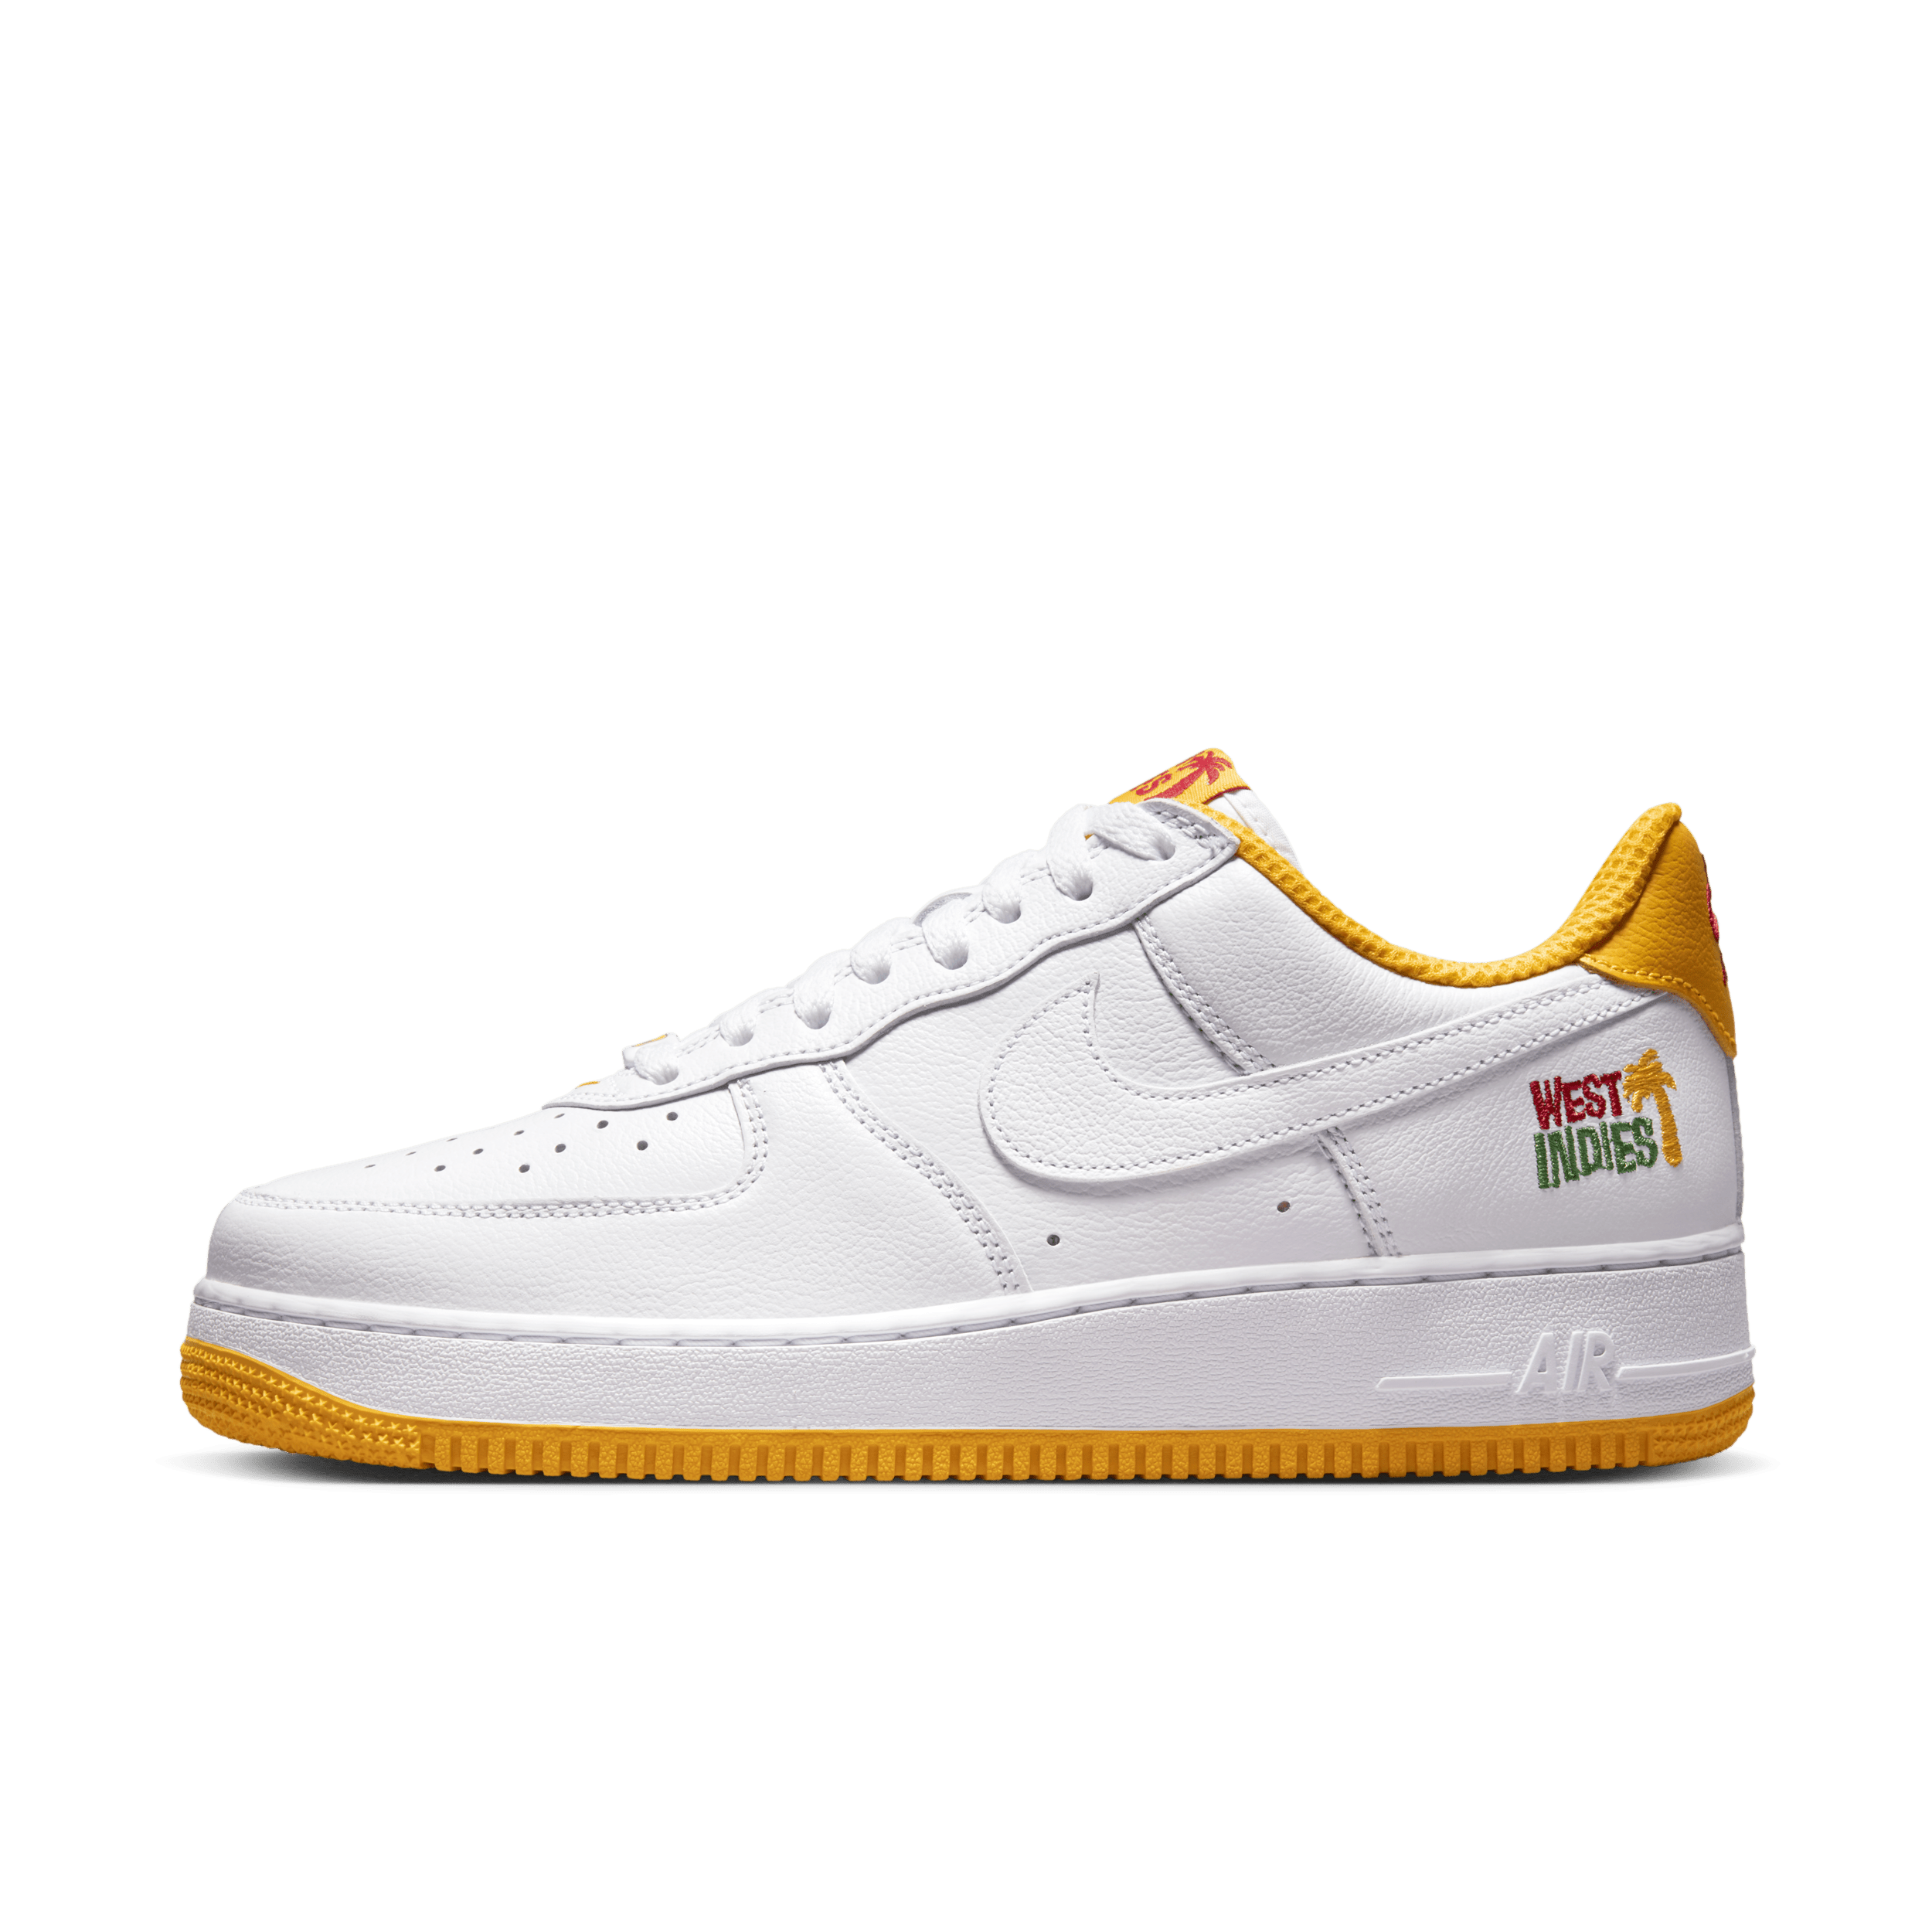 Nike Air Force 1 Low Retro QS Herenschoenen - Wit